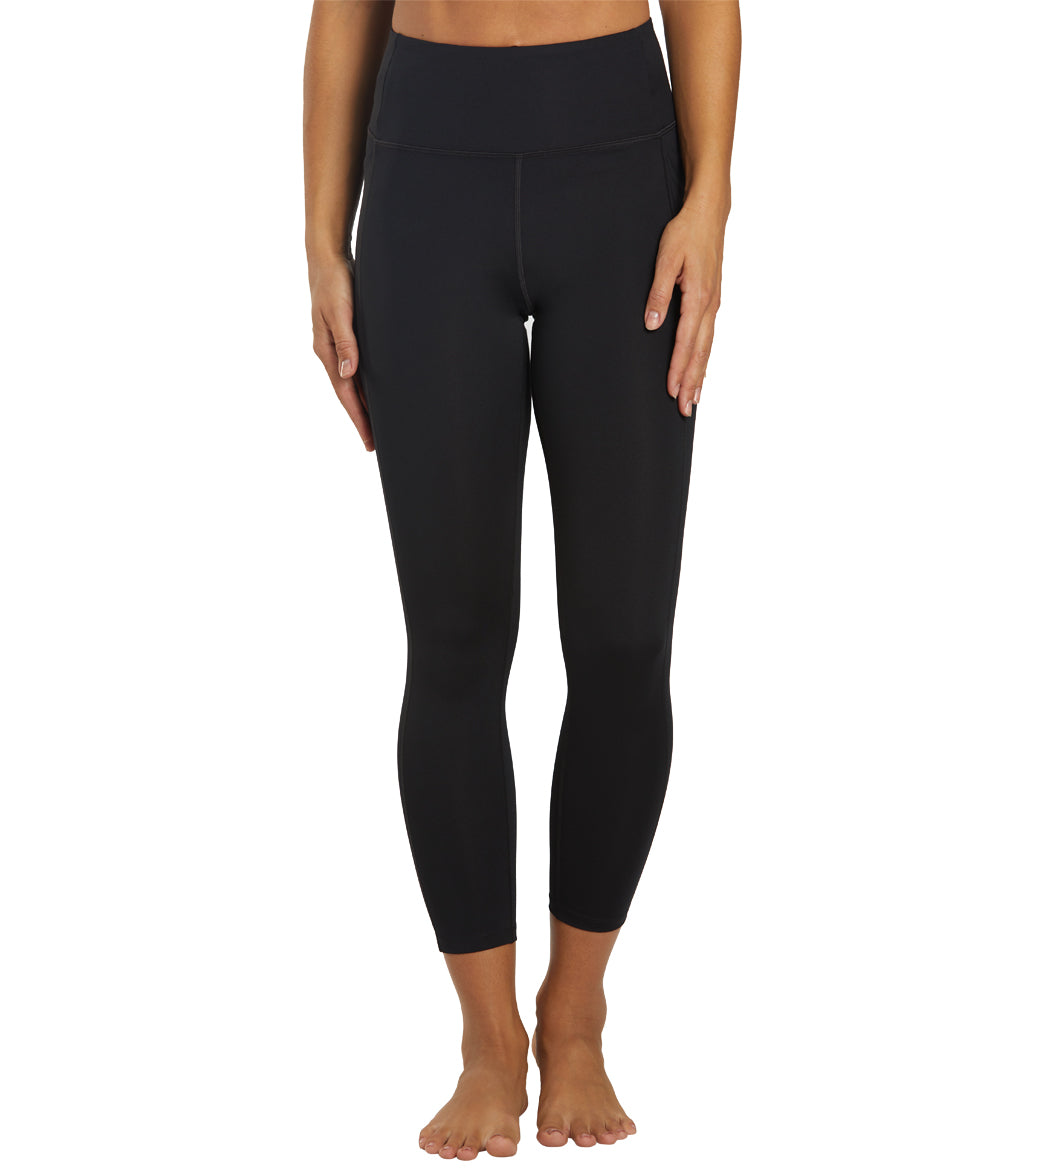 Girlfriend Collective Women's Yoga Clothing